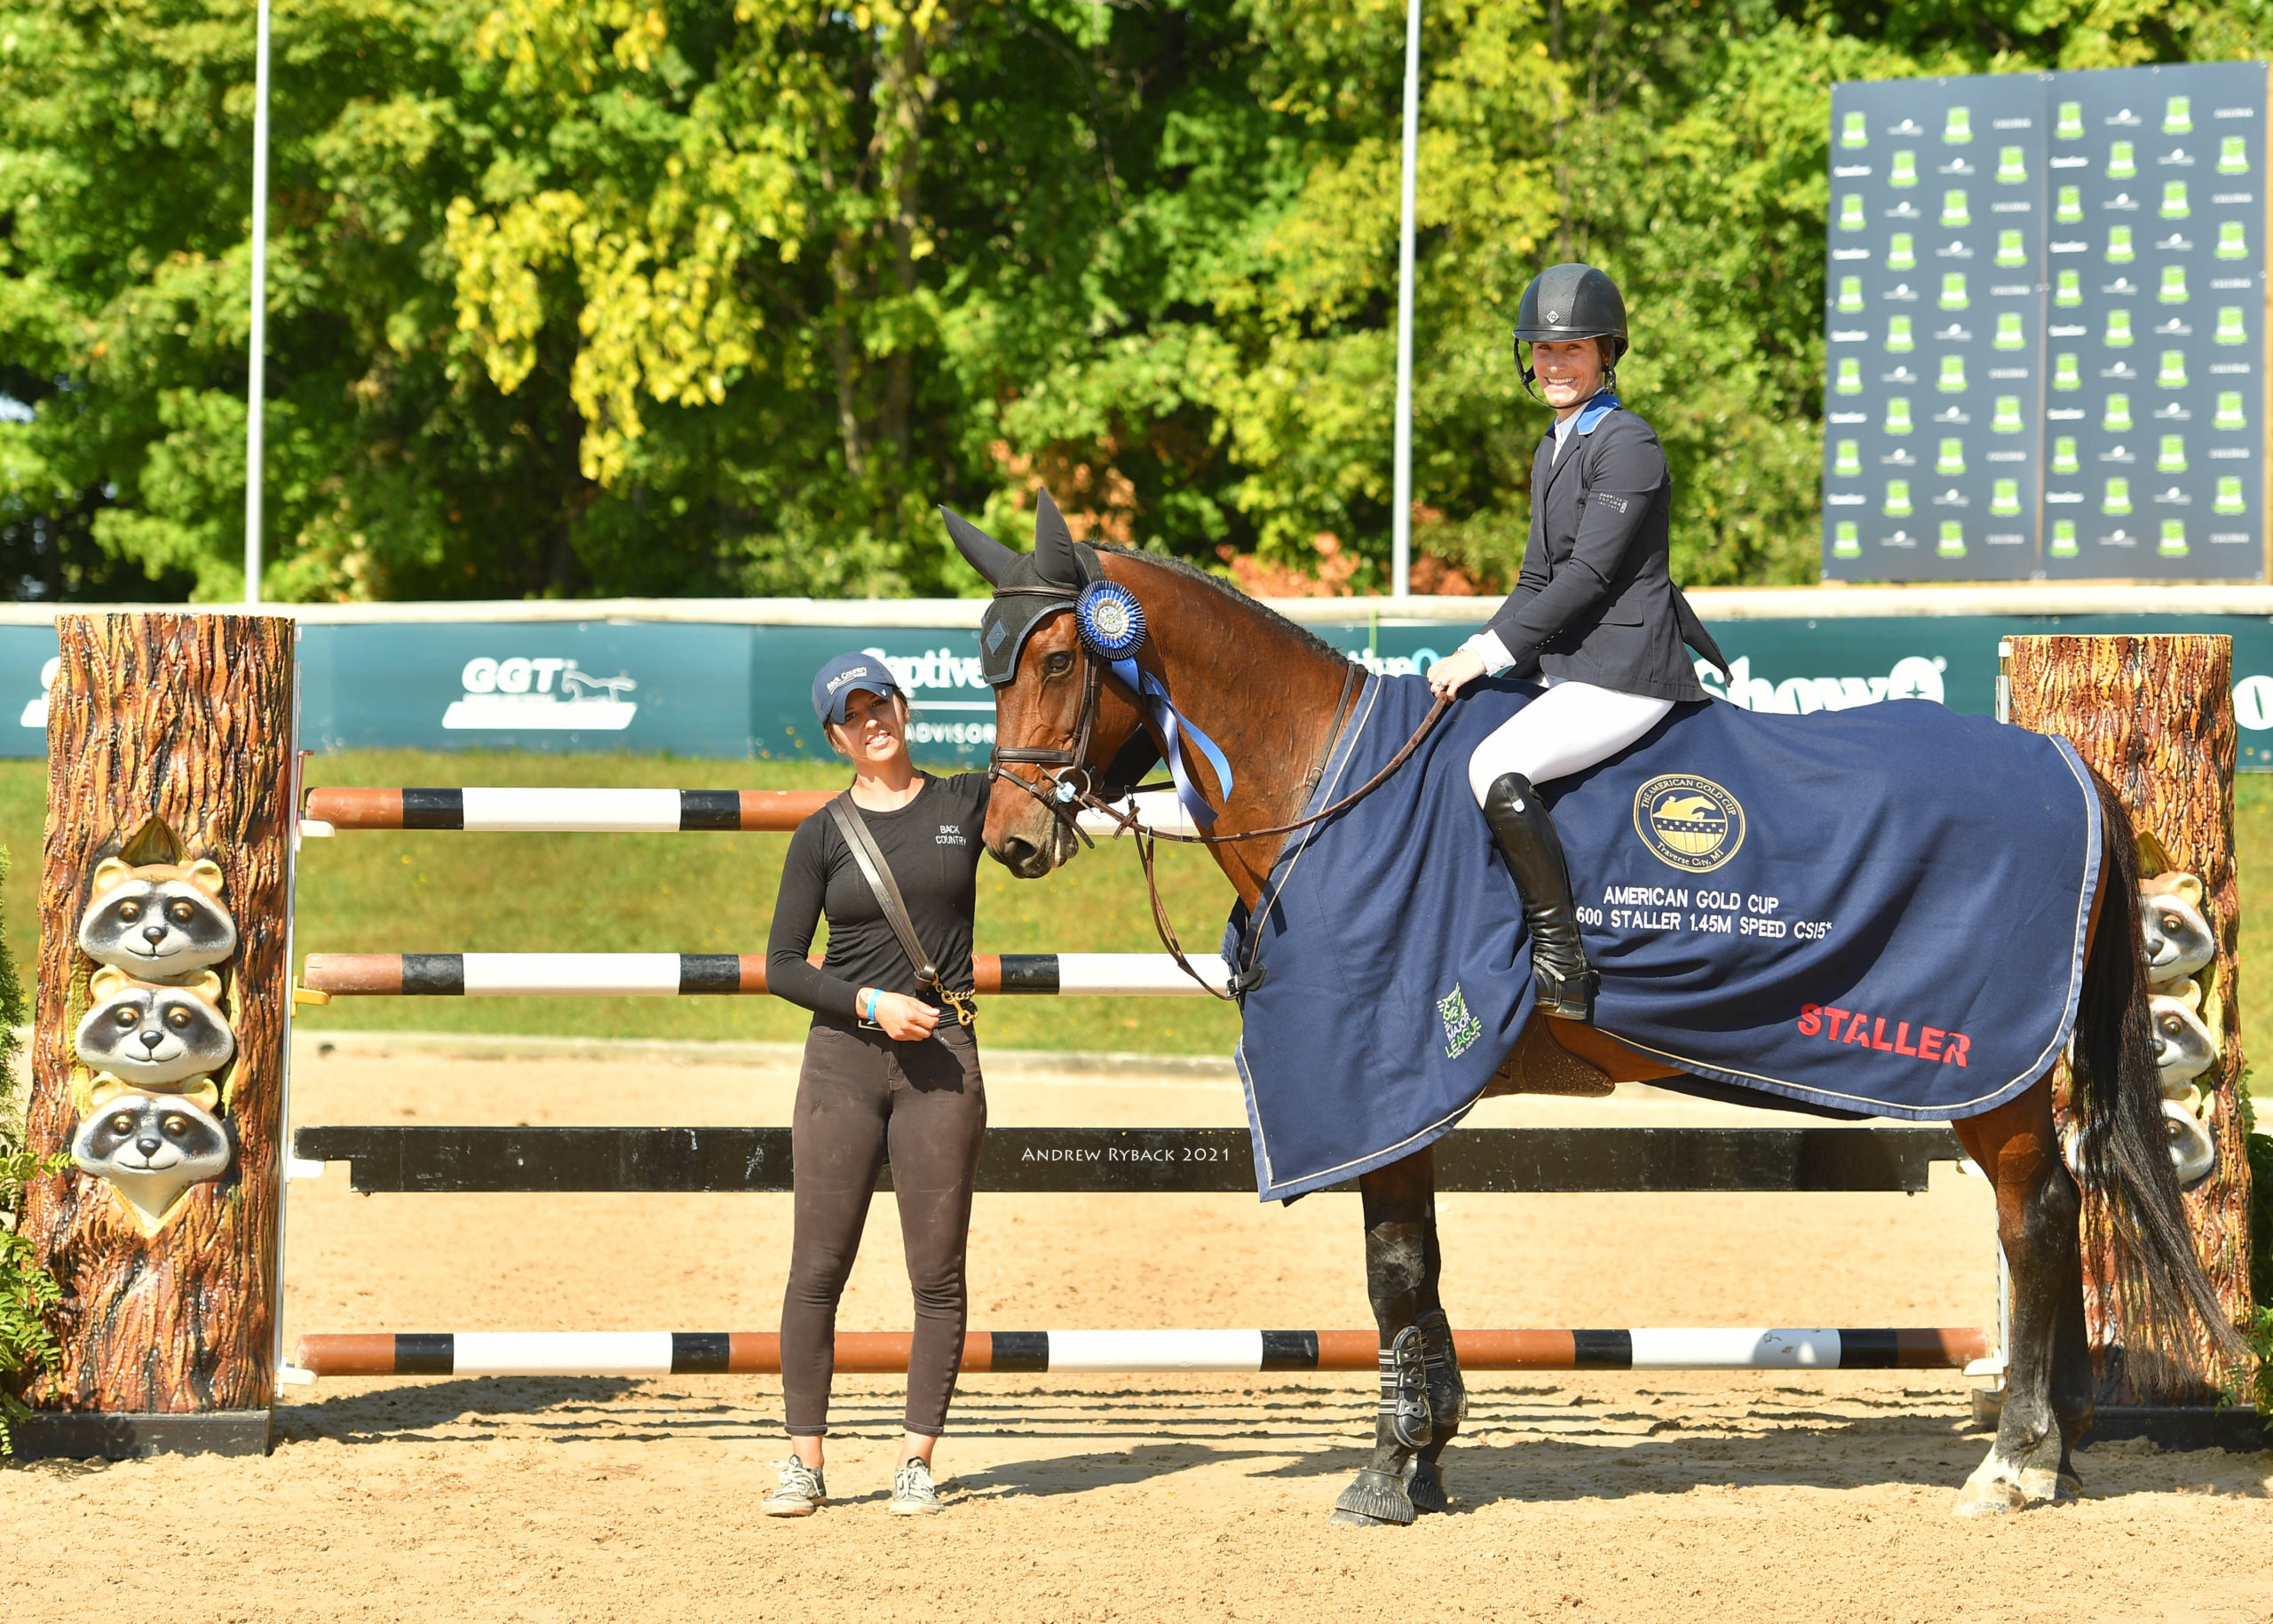 Traverse City: Sydney Shulman and Vilamoura win again in 1m45 speed stake